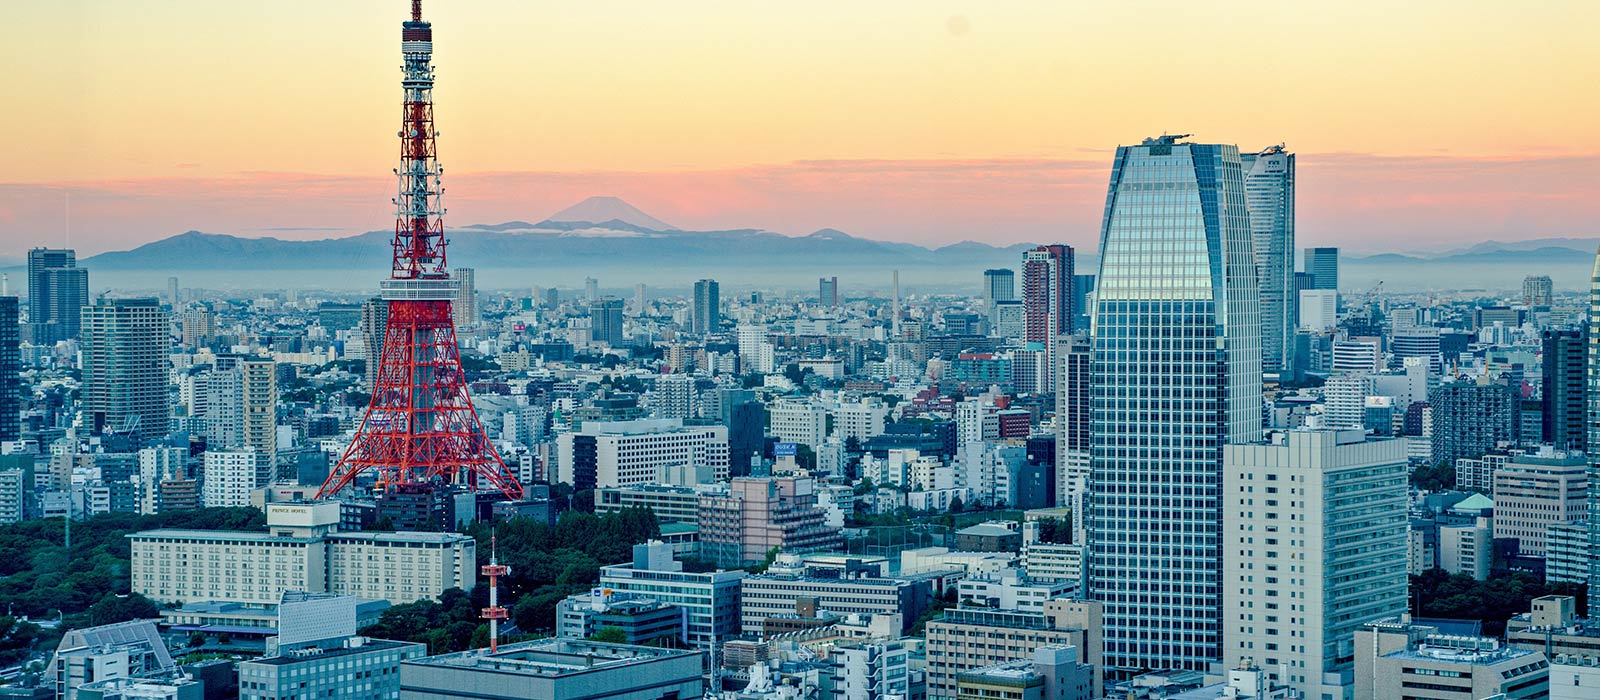 The glow of sunrise appears over the Tokyo skyline